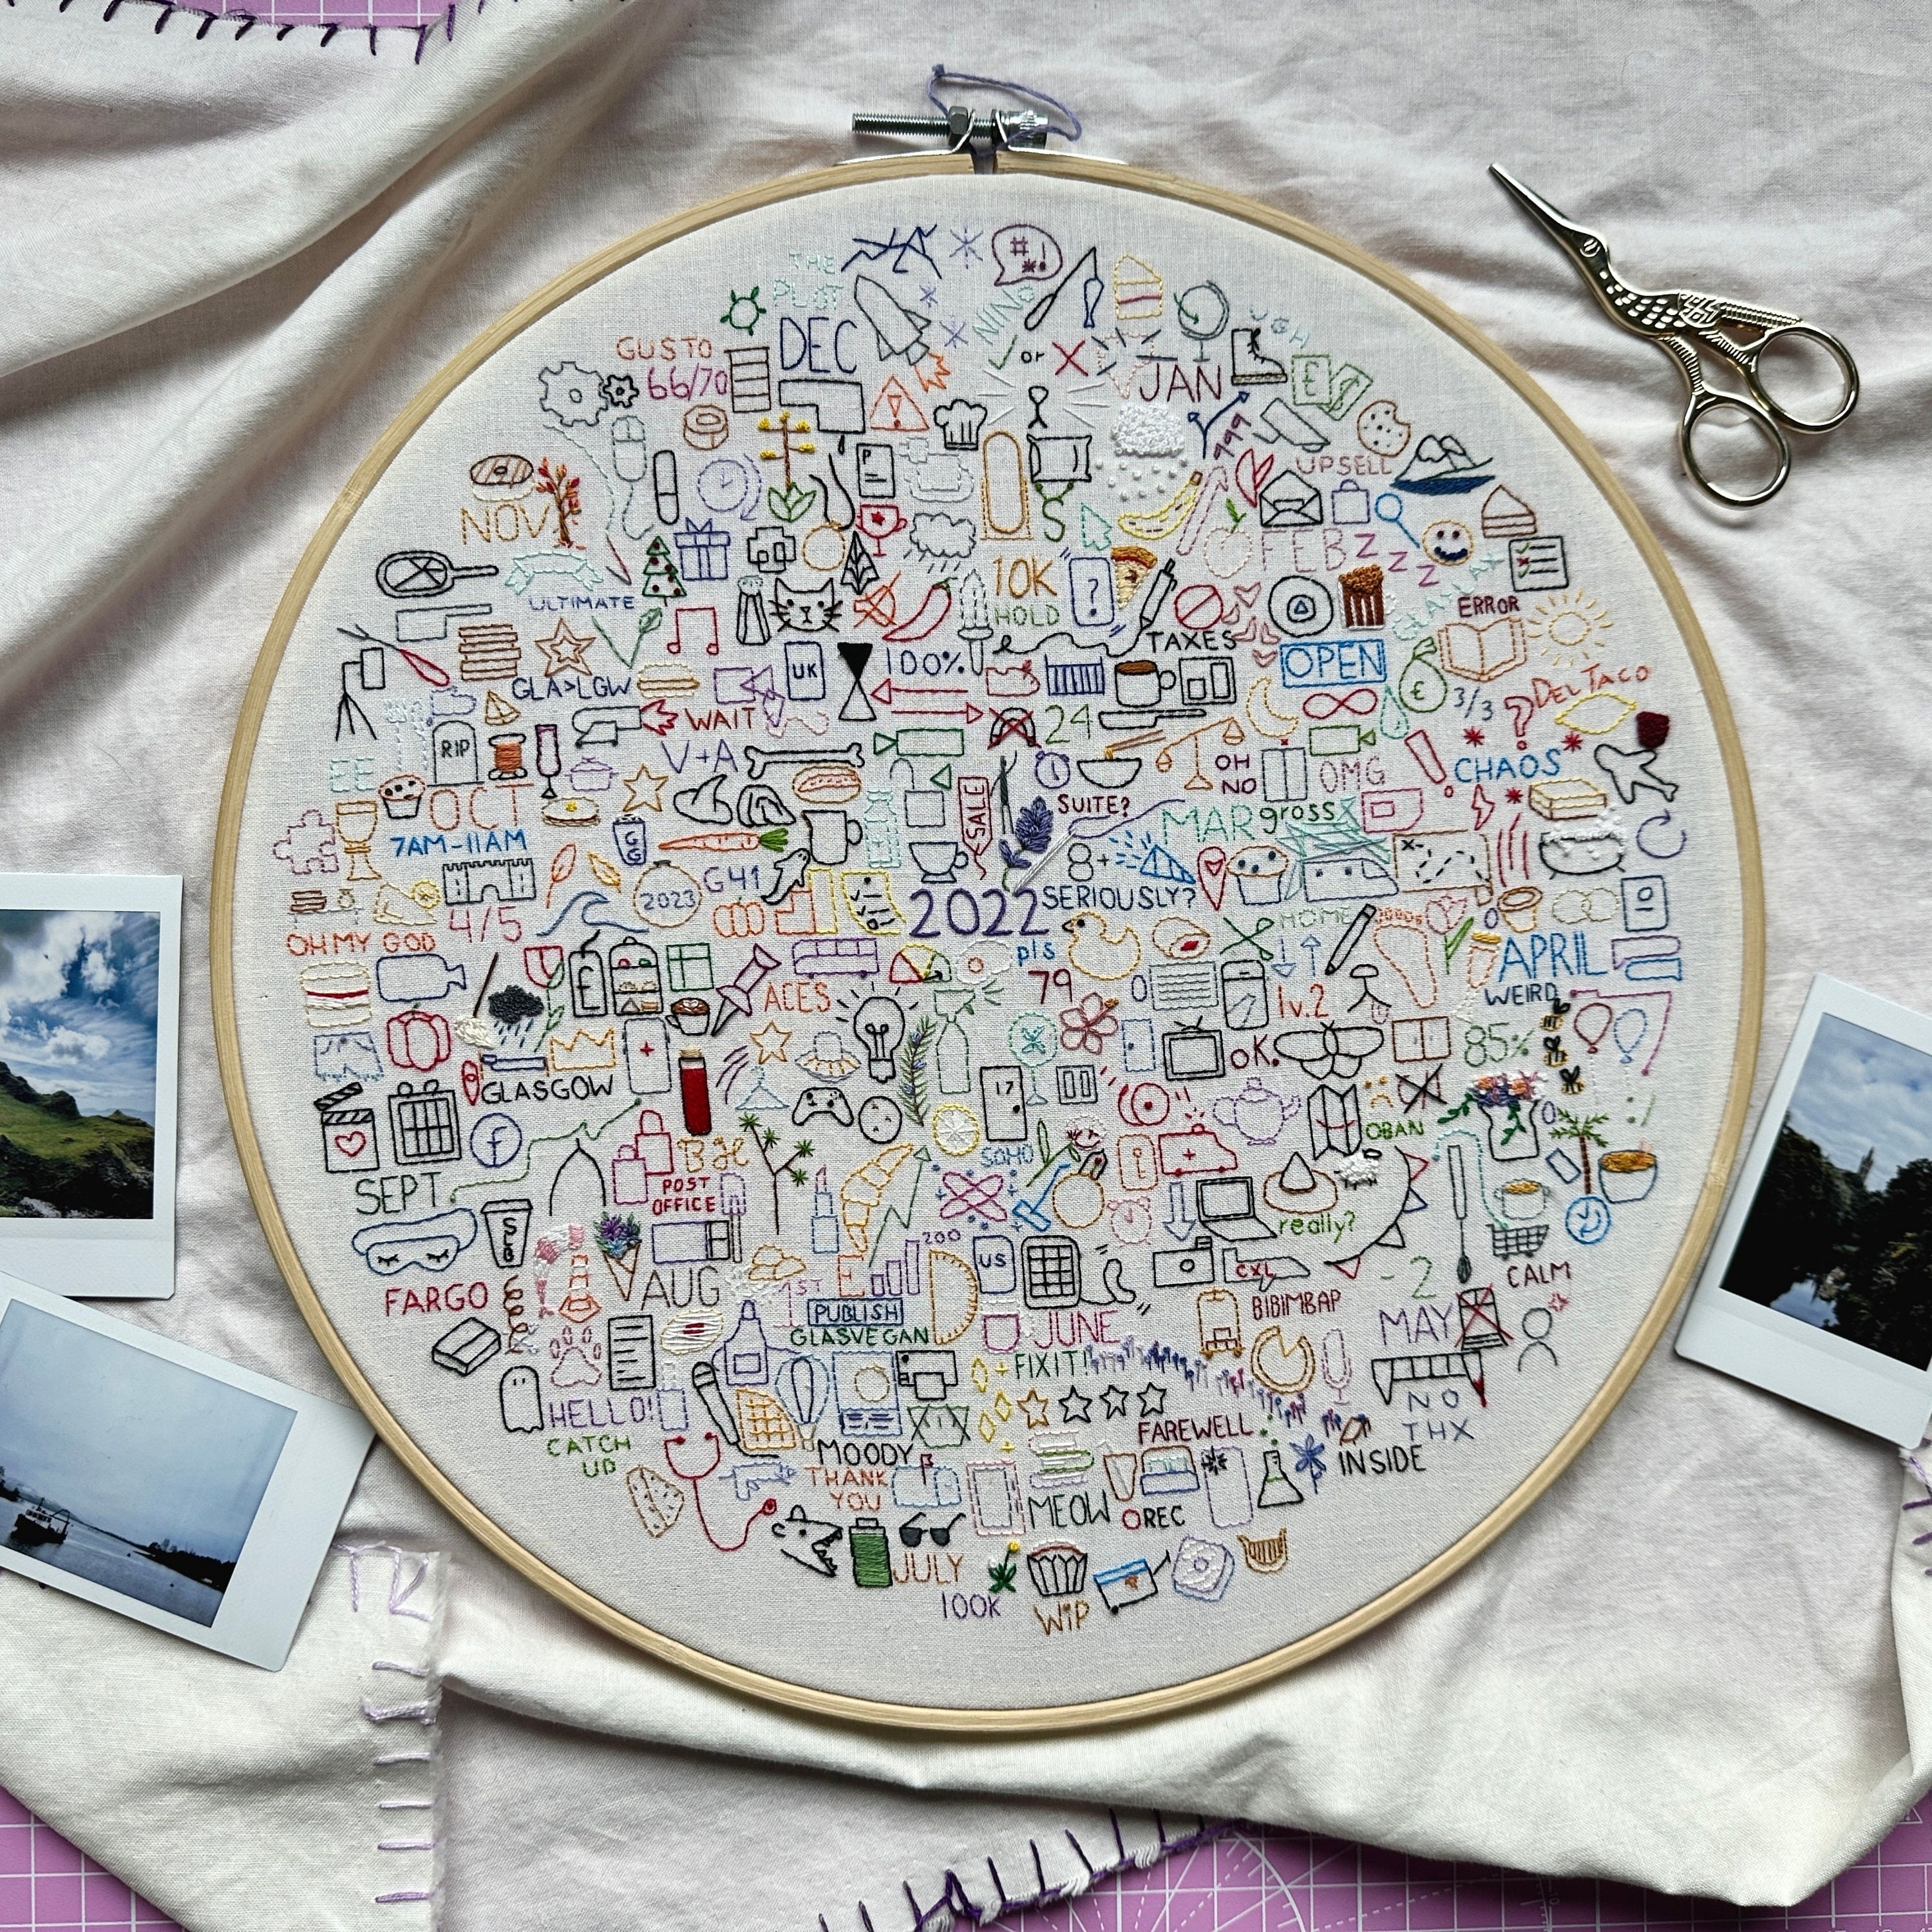 How To Choose Icon Size & Placement On Your Embroidery Journal